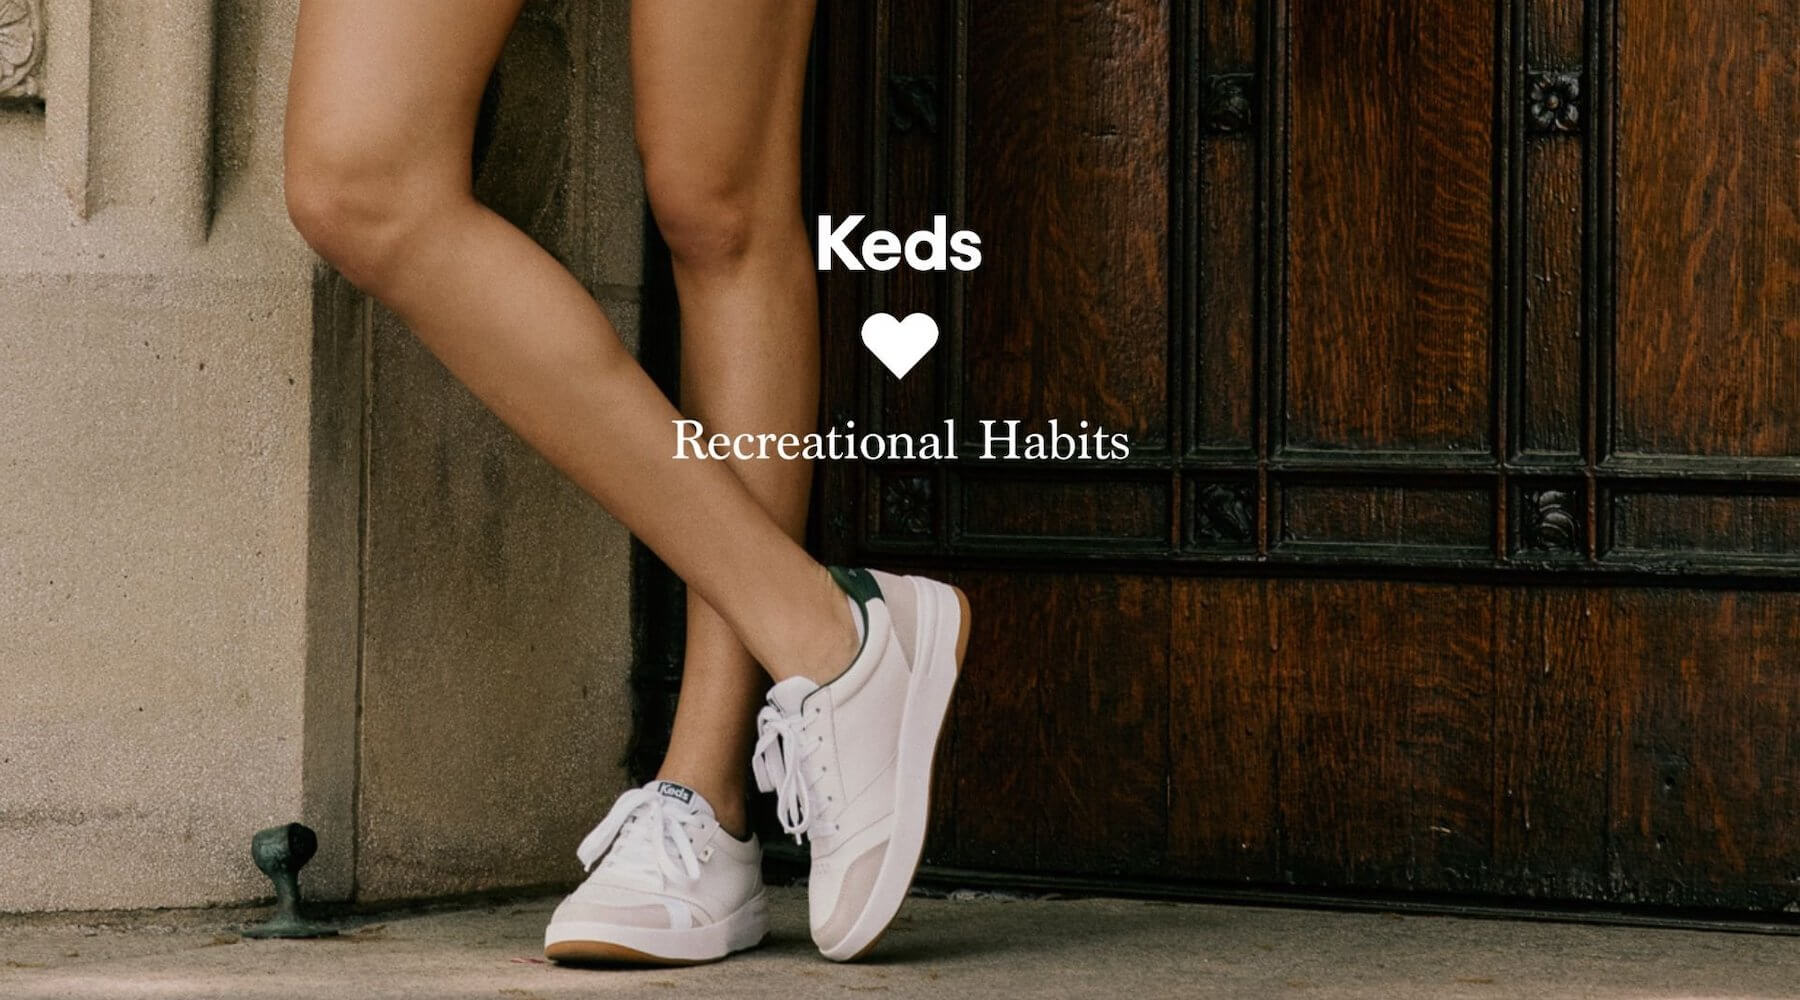 The Recreational Habits x Keds Court Sneaker